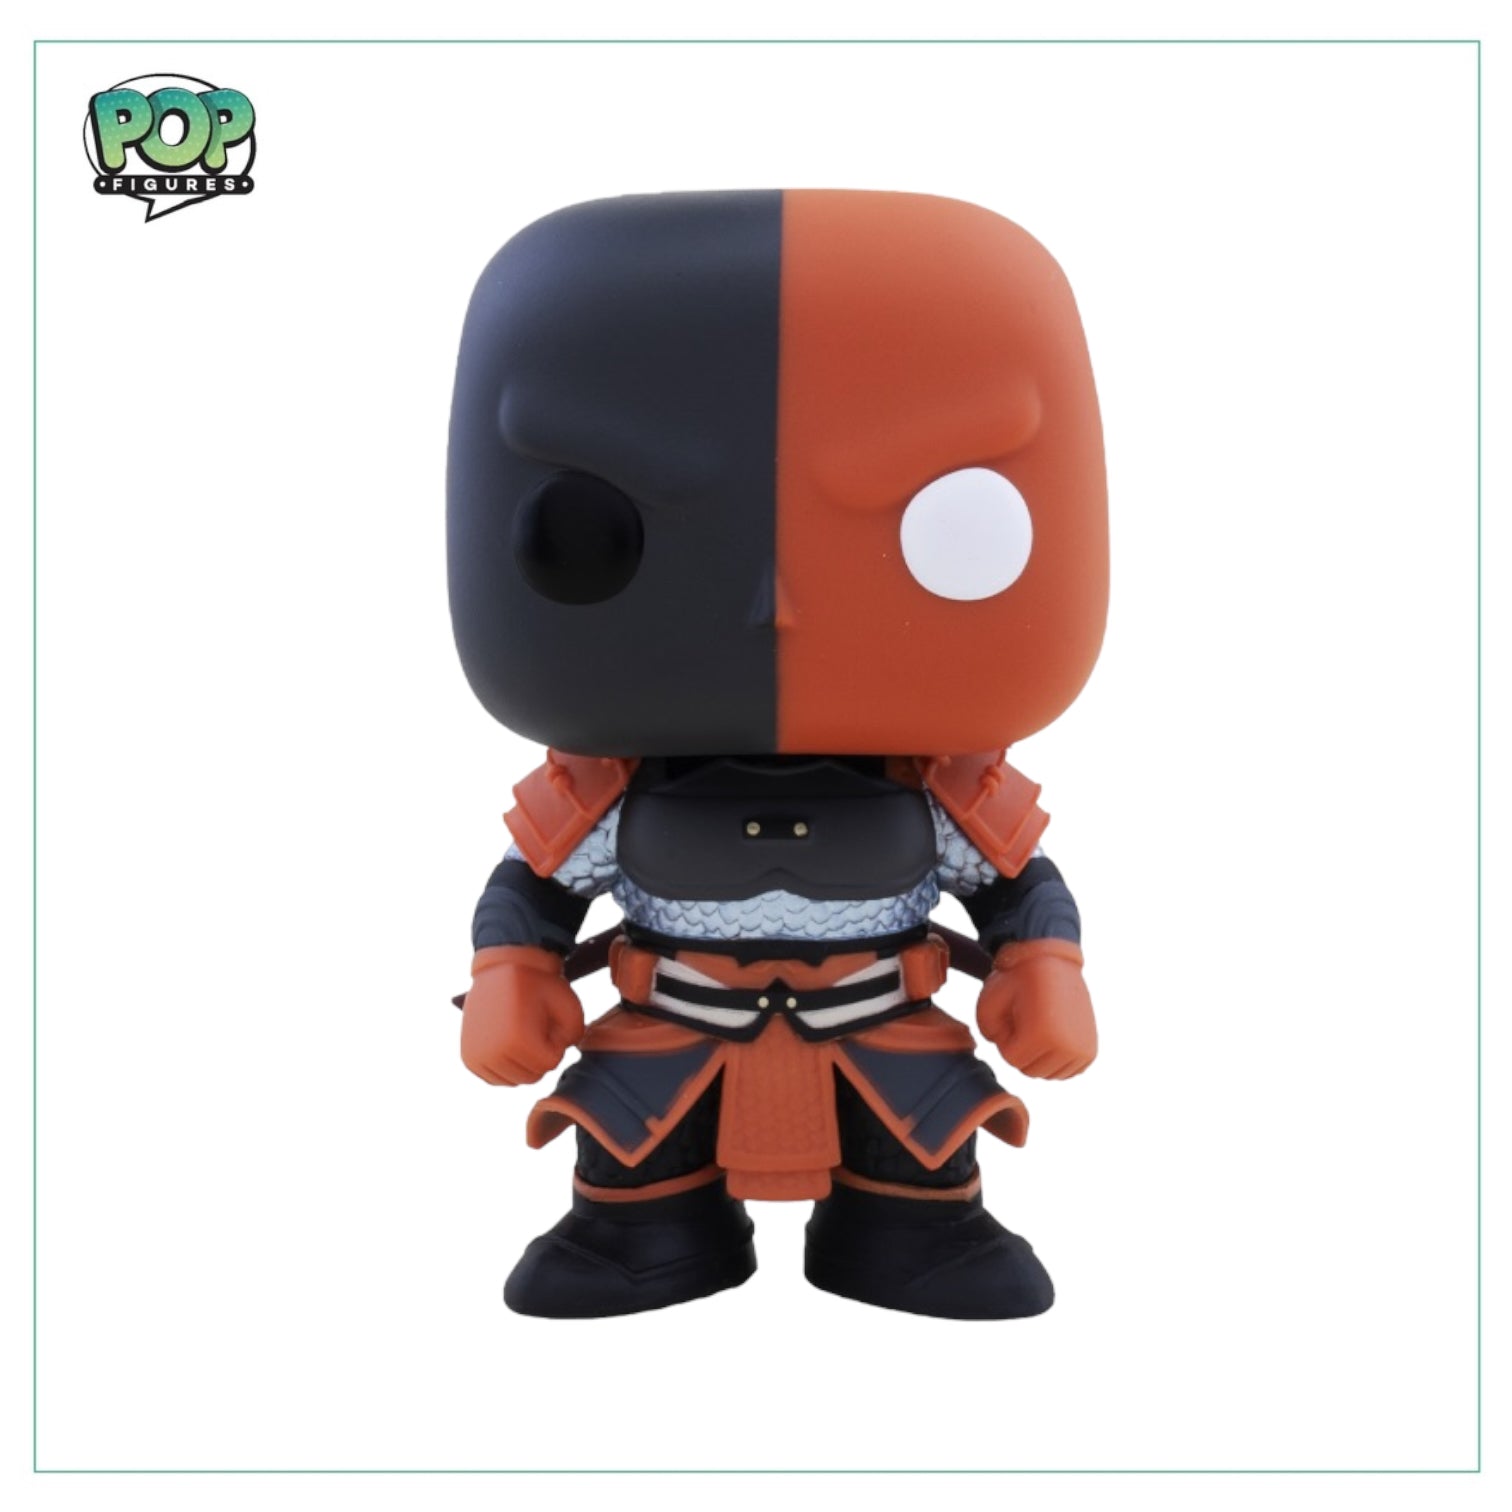 Deathstroke #368 Funko Pop! - DC Imperial Palace - Virtual Funkon 2021 Shared Exclusive